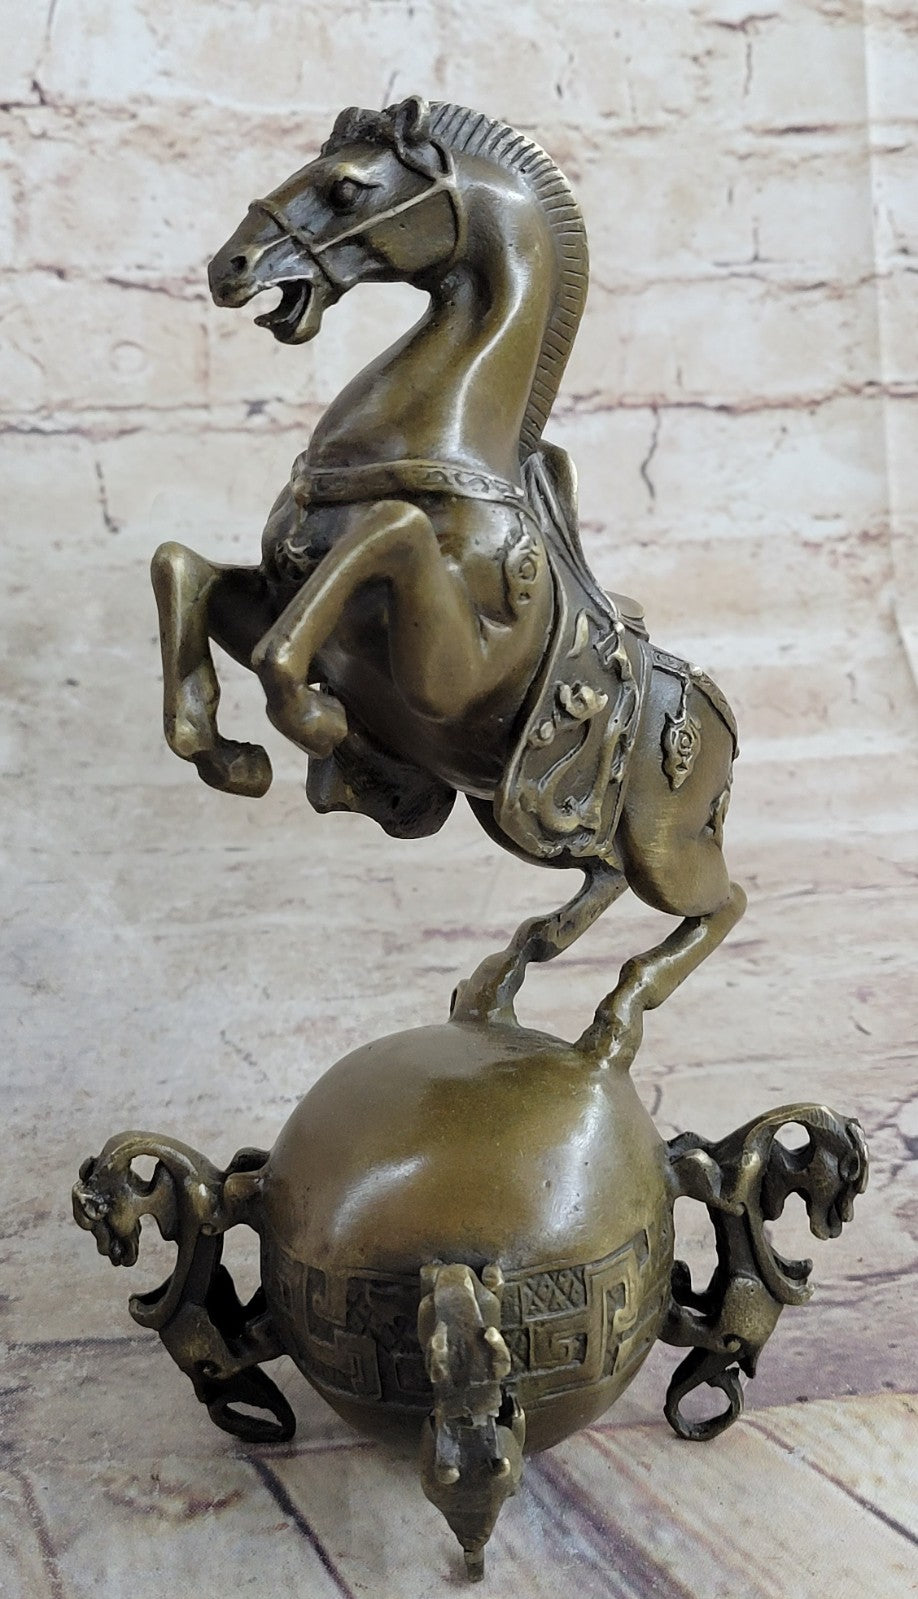 Handcrafted bronze sculpture SALE Horse "Tang" Classic Chinese Wonderful Figure